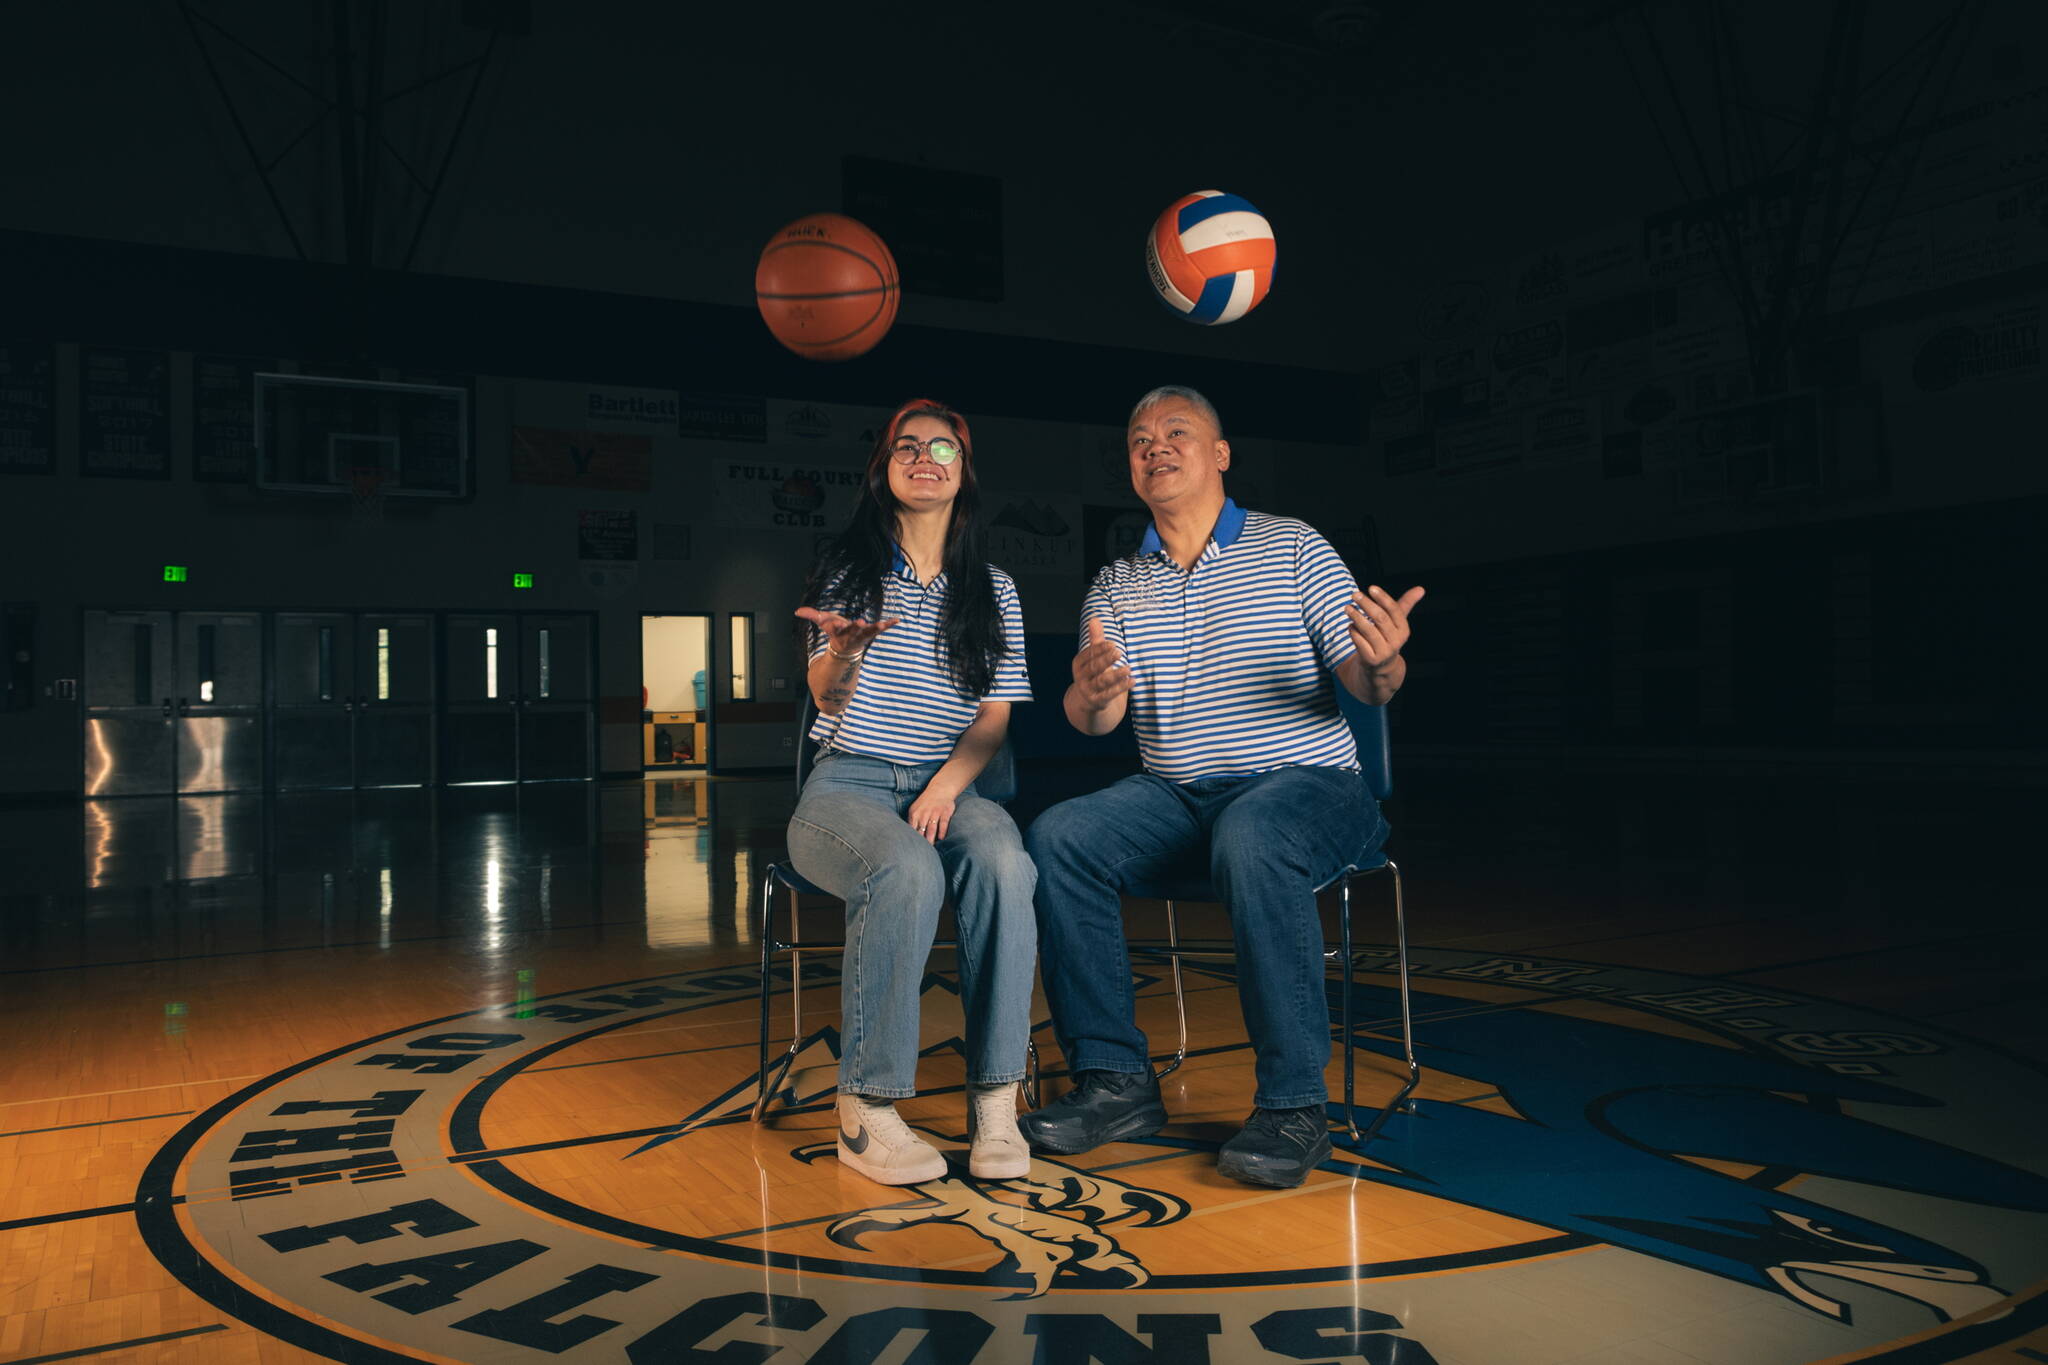 Former Thunder Mountain High School JV basketball coach Kylie Ibias, and former TMHS JV basketball and volleyball coach Arnold Ibias sit in the TMHS gymnasium during an interview for a soon-to-be released documentary. (Photo courtesy of Sonny Hunt-Mauricio)